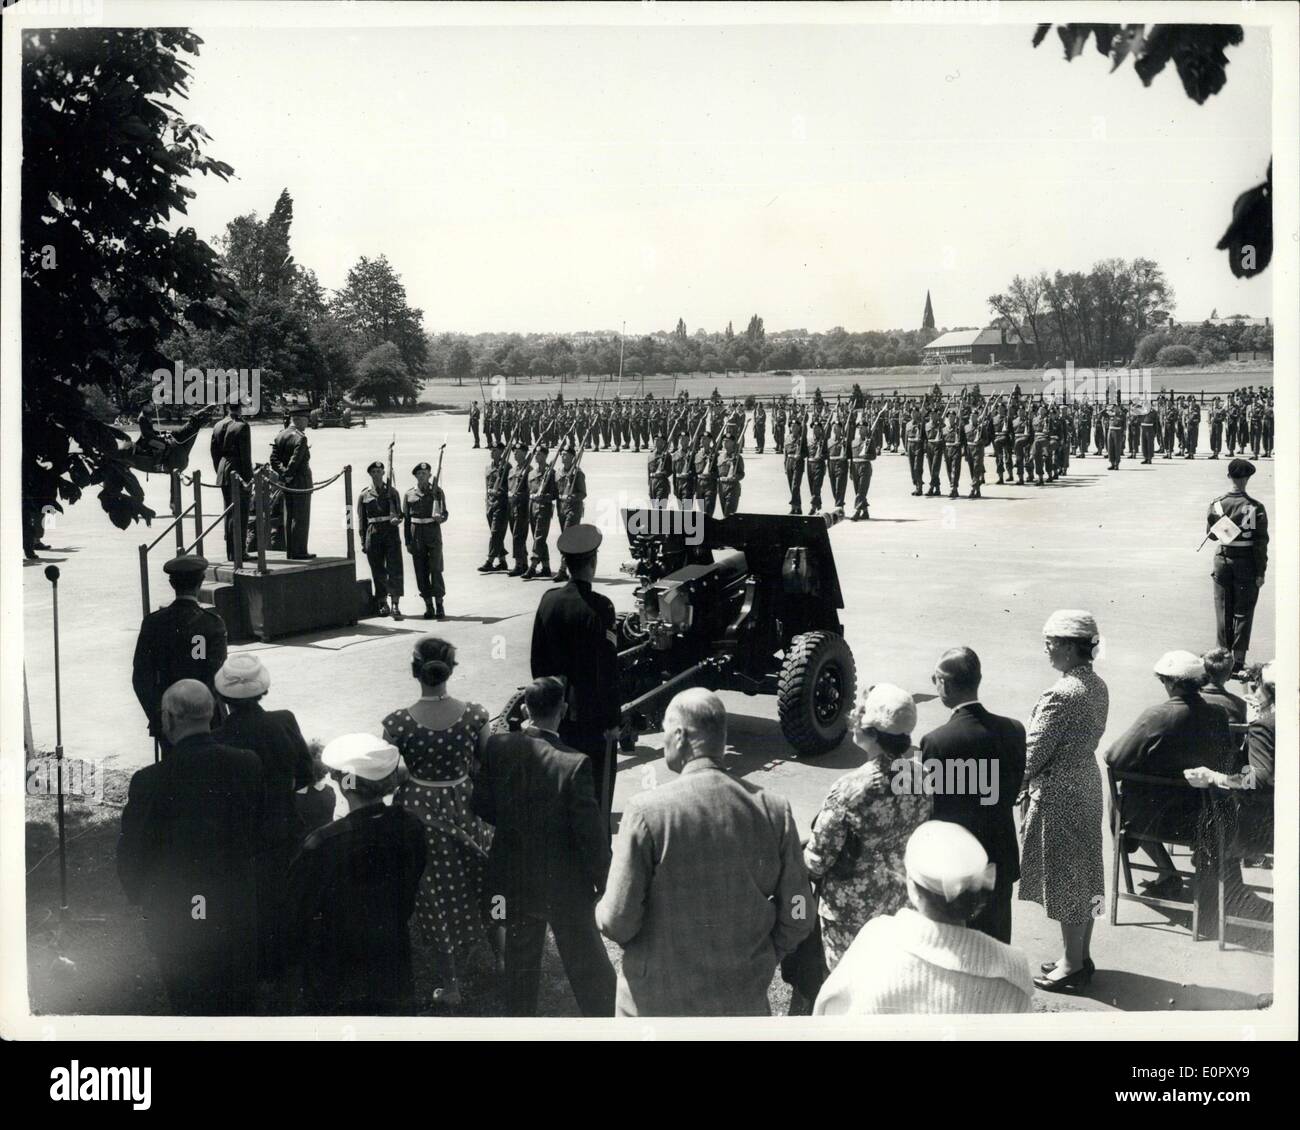 Jun. 14, 1957 - Passing out parade of the Mins Officer Cadet School. The March Off.: Field Marshall Viscount Montgomery took the salute at the Passing Out Parade of the Mons Officer Cadet School, Aldershot today. Photo shows - General view at the March Off during the Parade at Aldershot today. Stock Photo